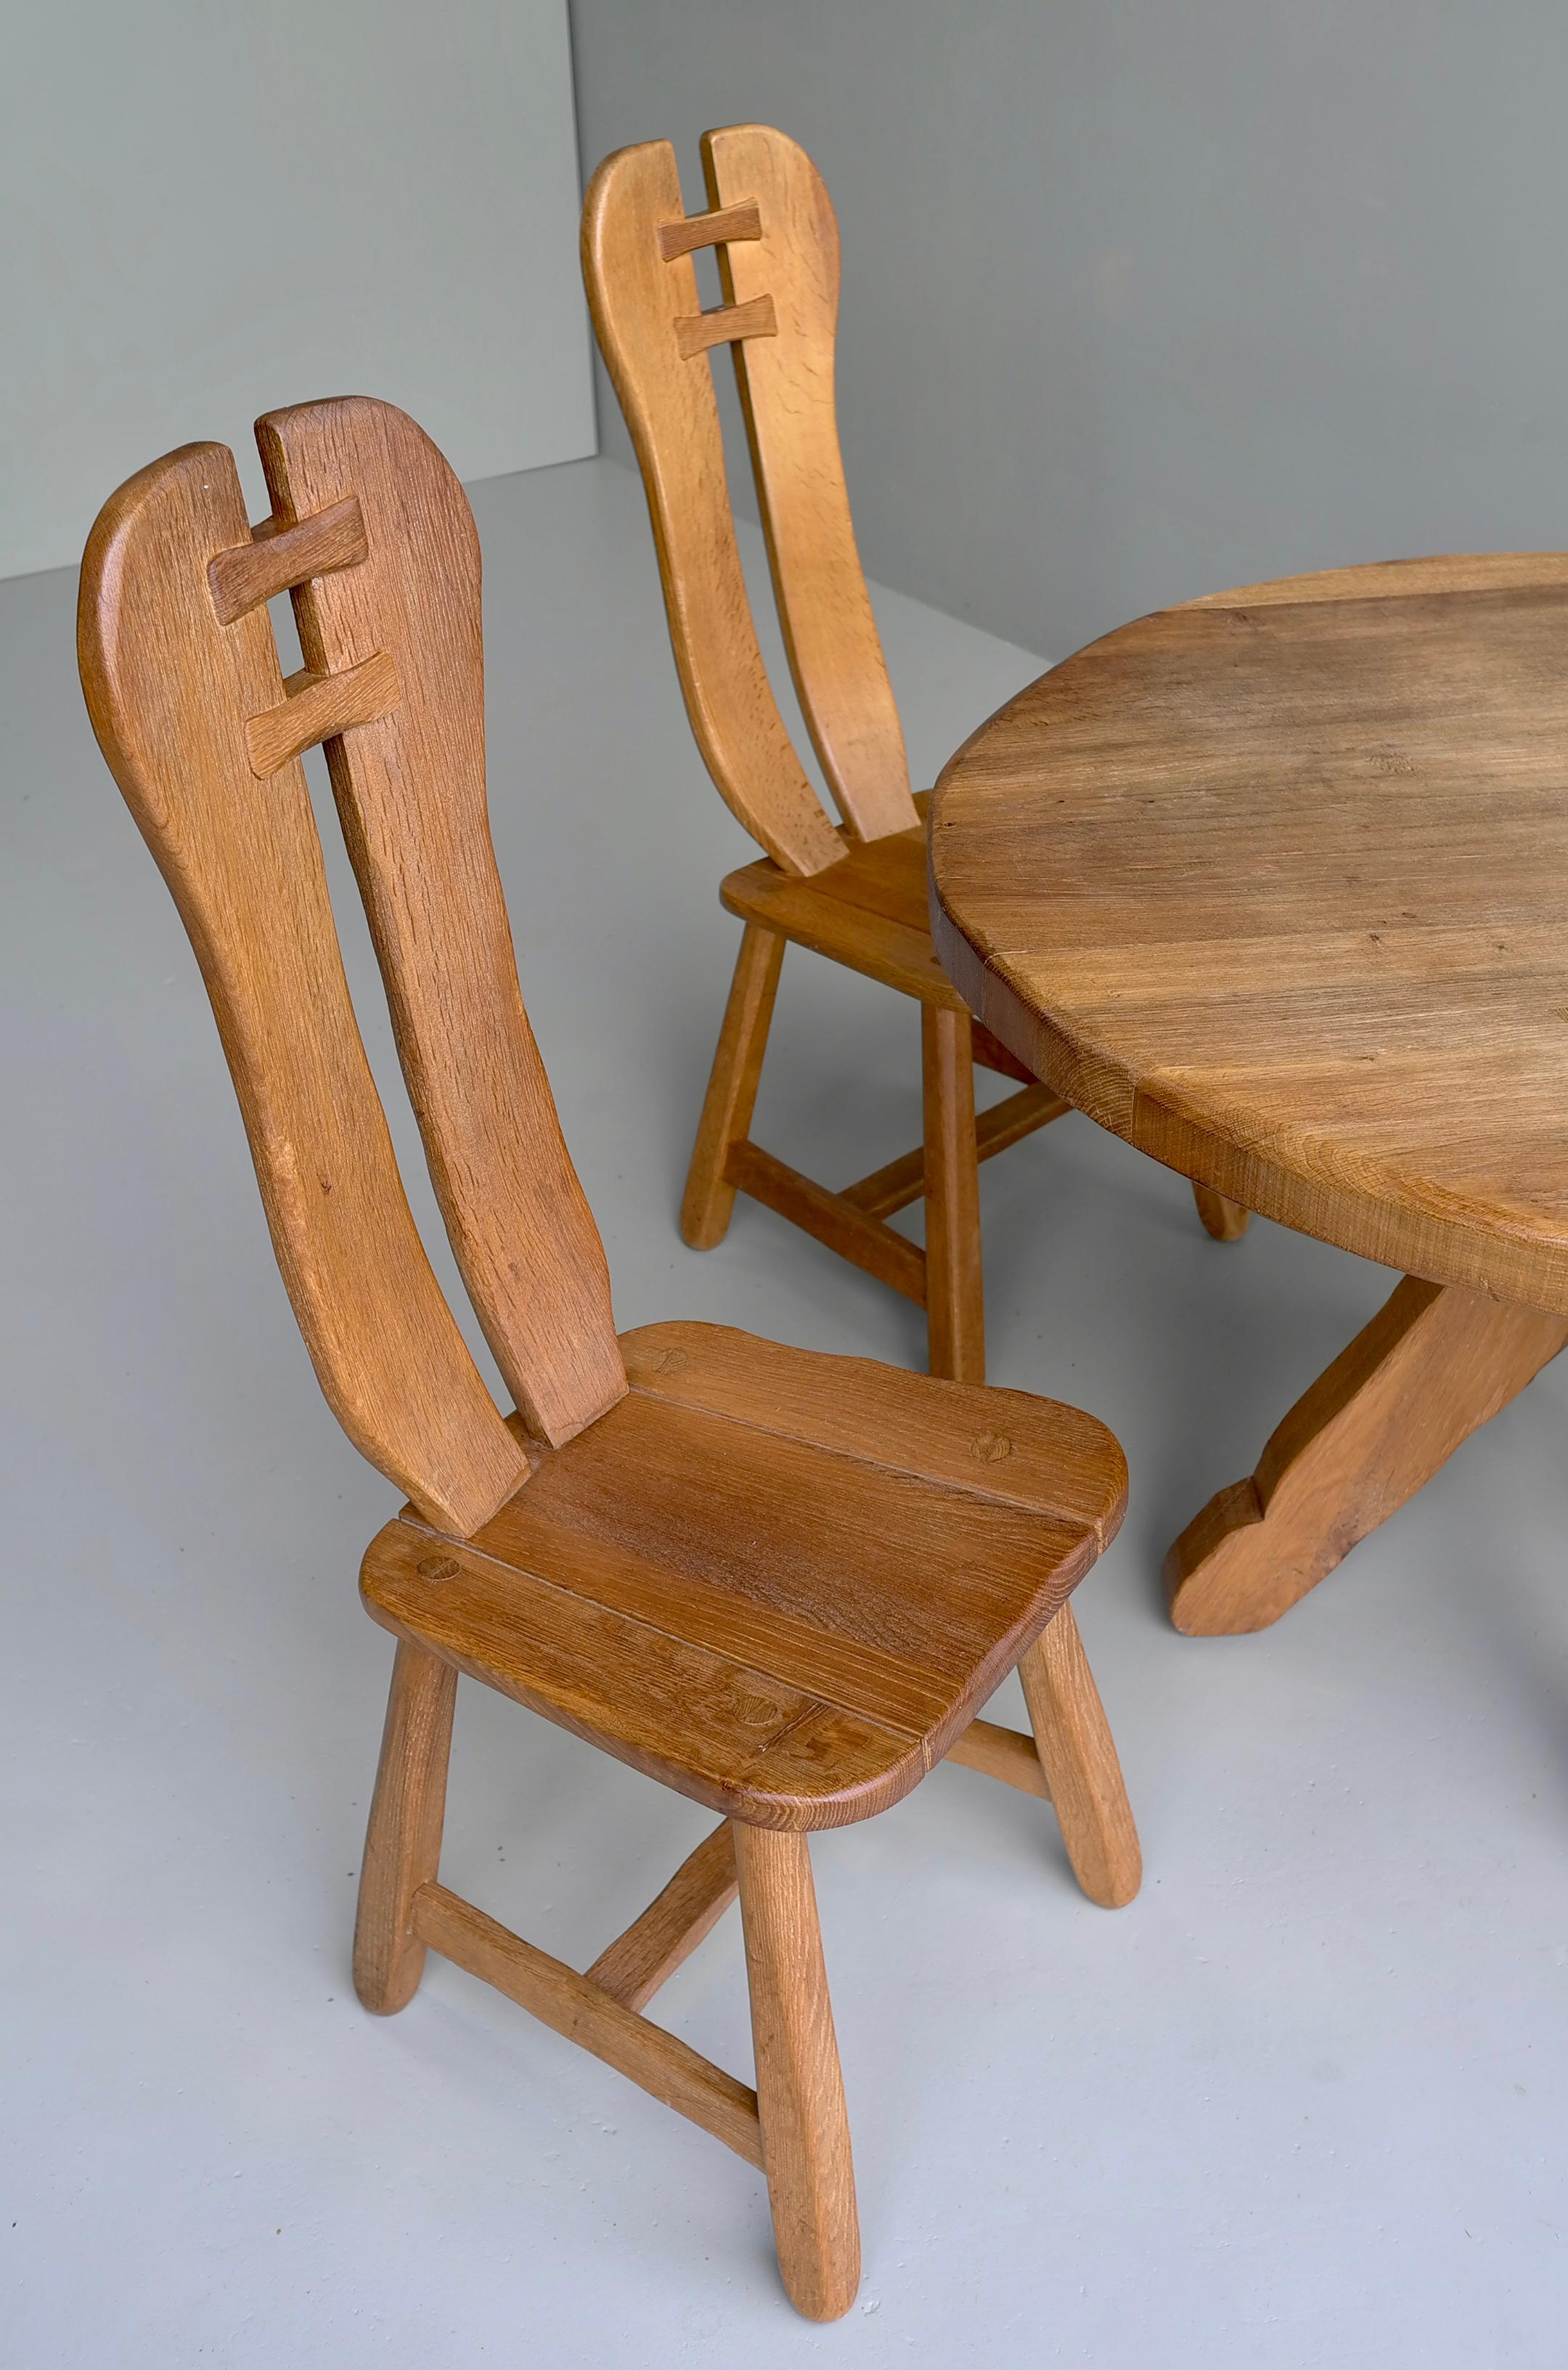 Organic oak dining set by Architectural Firm De Puydt, Belgium, 1970s.
De Puydt named thereself an artistic architectural firm, they created quality oak firm with unusual vorms.

Measures: Table diameter: 112, height 77cm
chairs: height 110, width